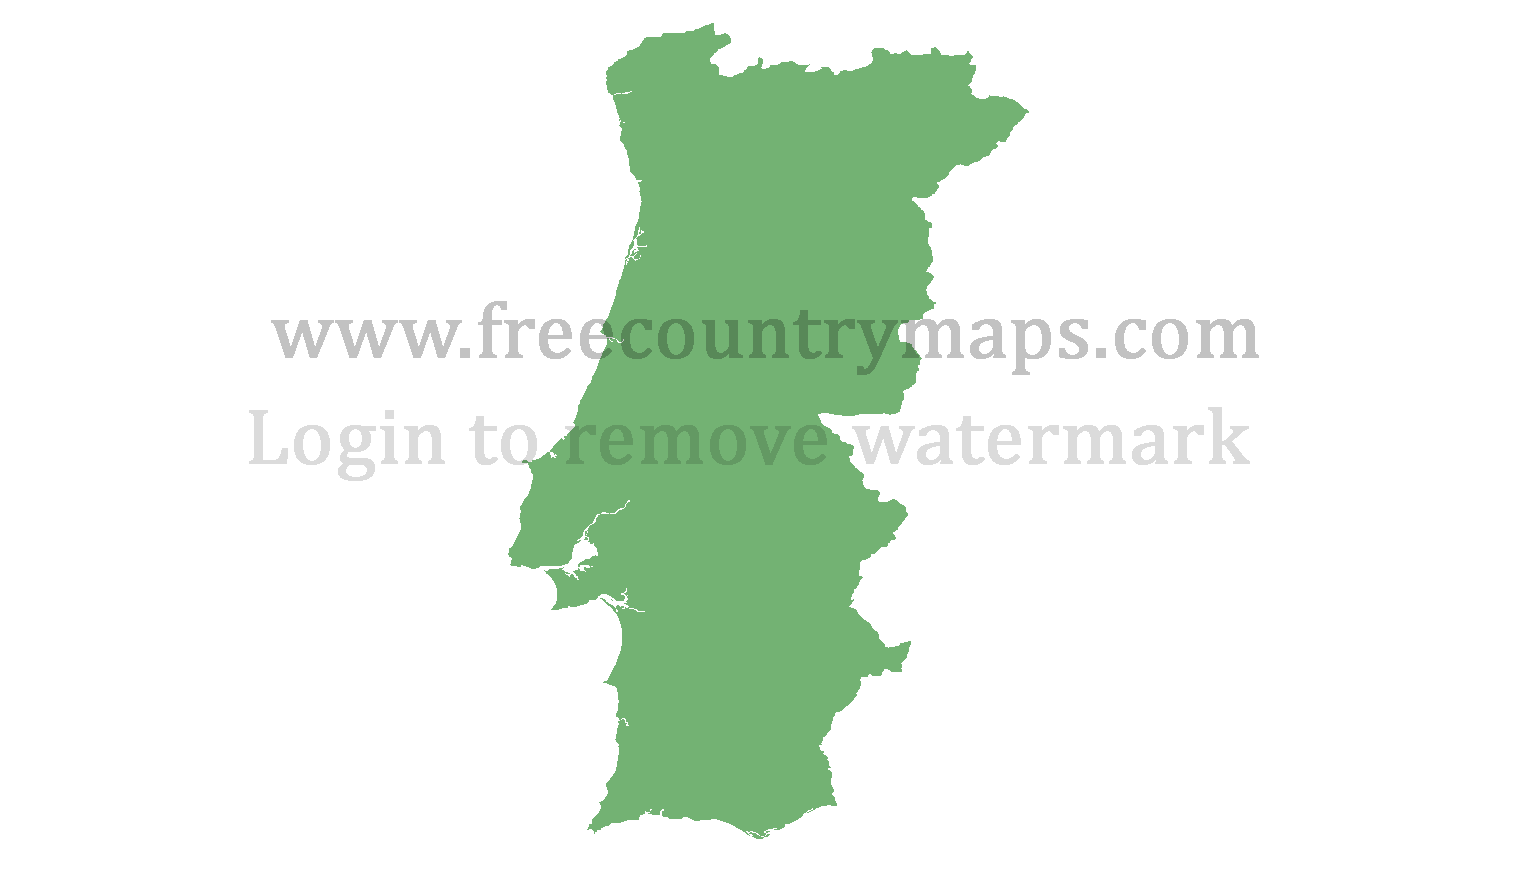 Blank Map of Portugal